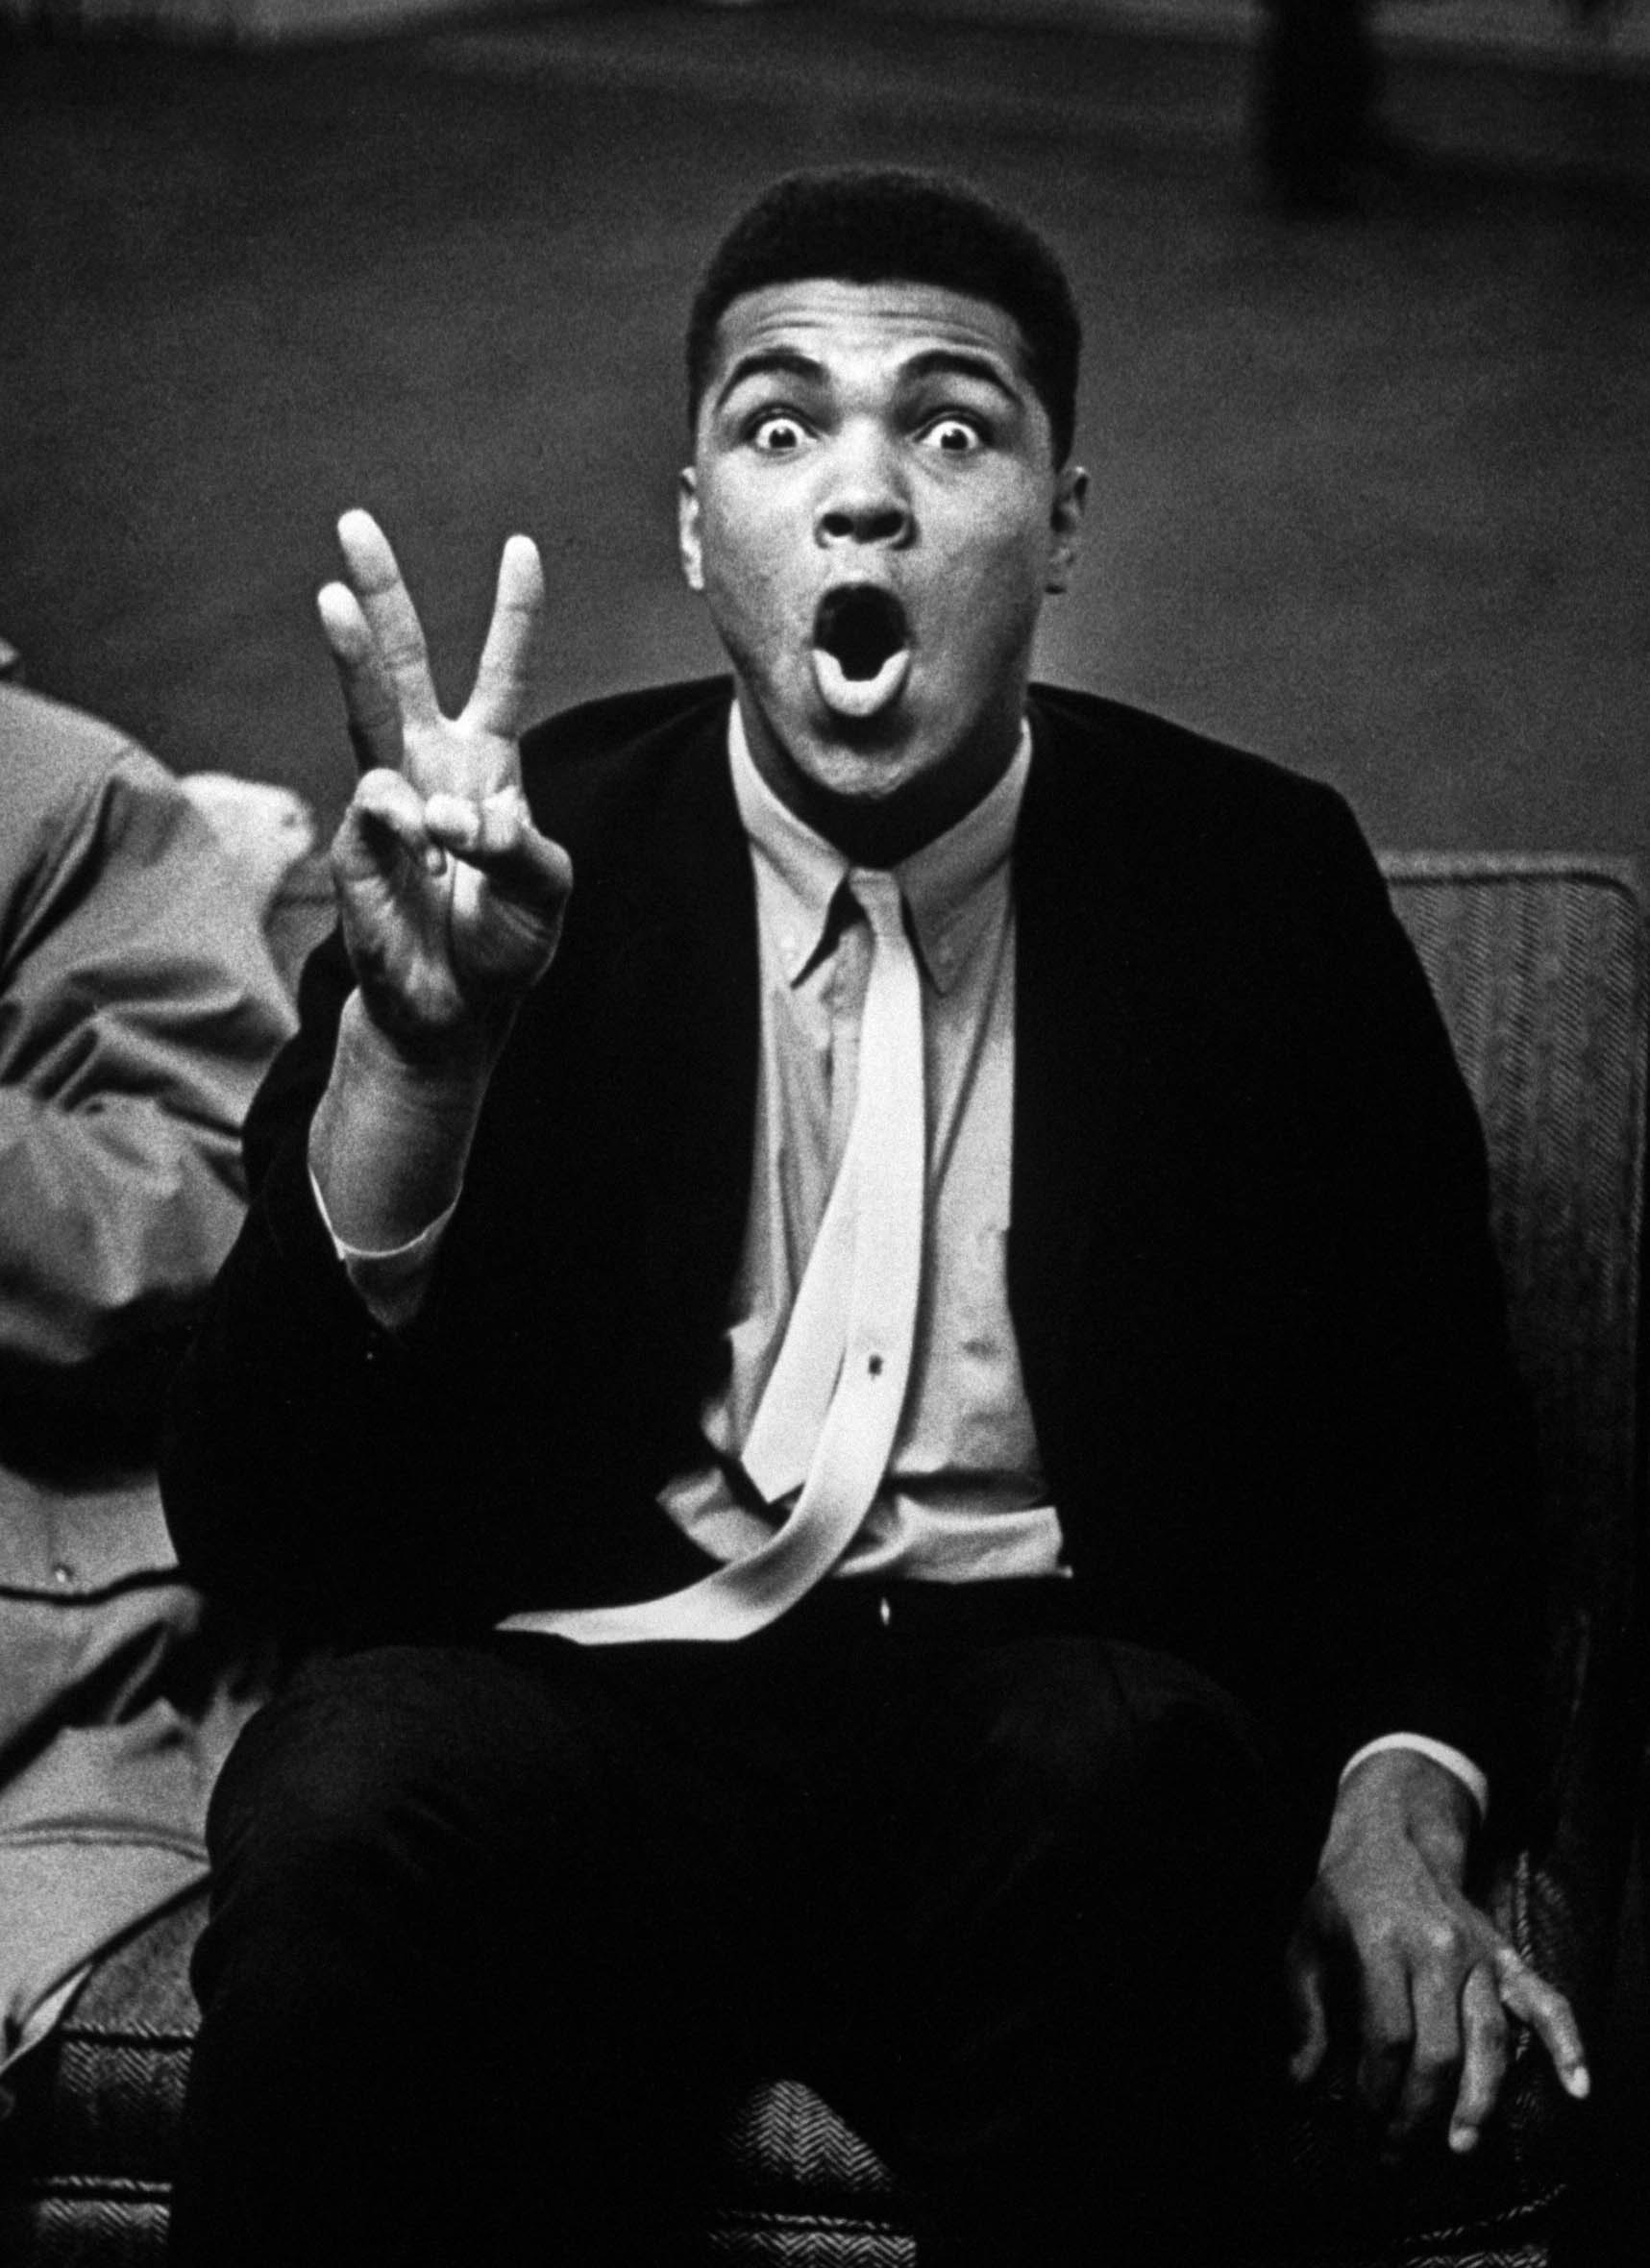 Boxing heavyweight contender Cassius Clay (later Muhammad Ali) holding up three fingers while reciting poem predicting that opponent Charlie Powell will fall in third round, 1963.